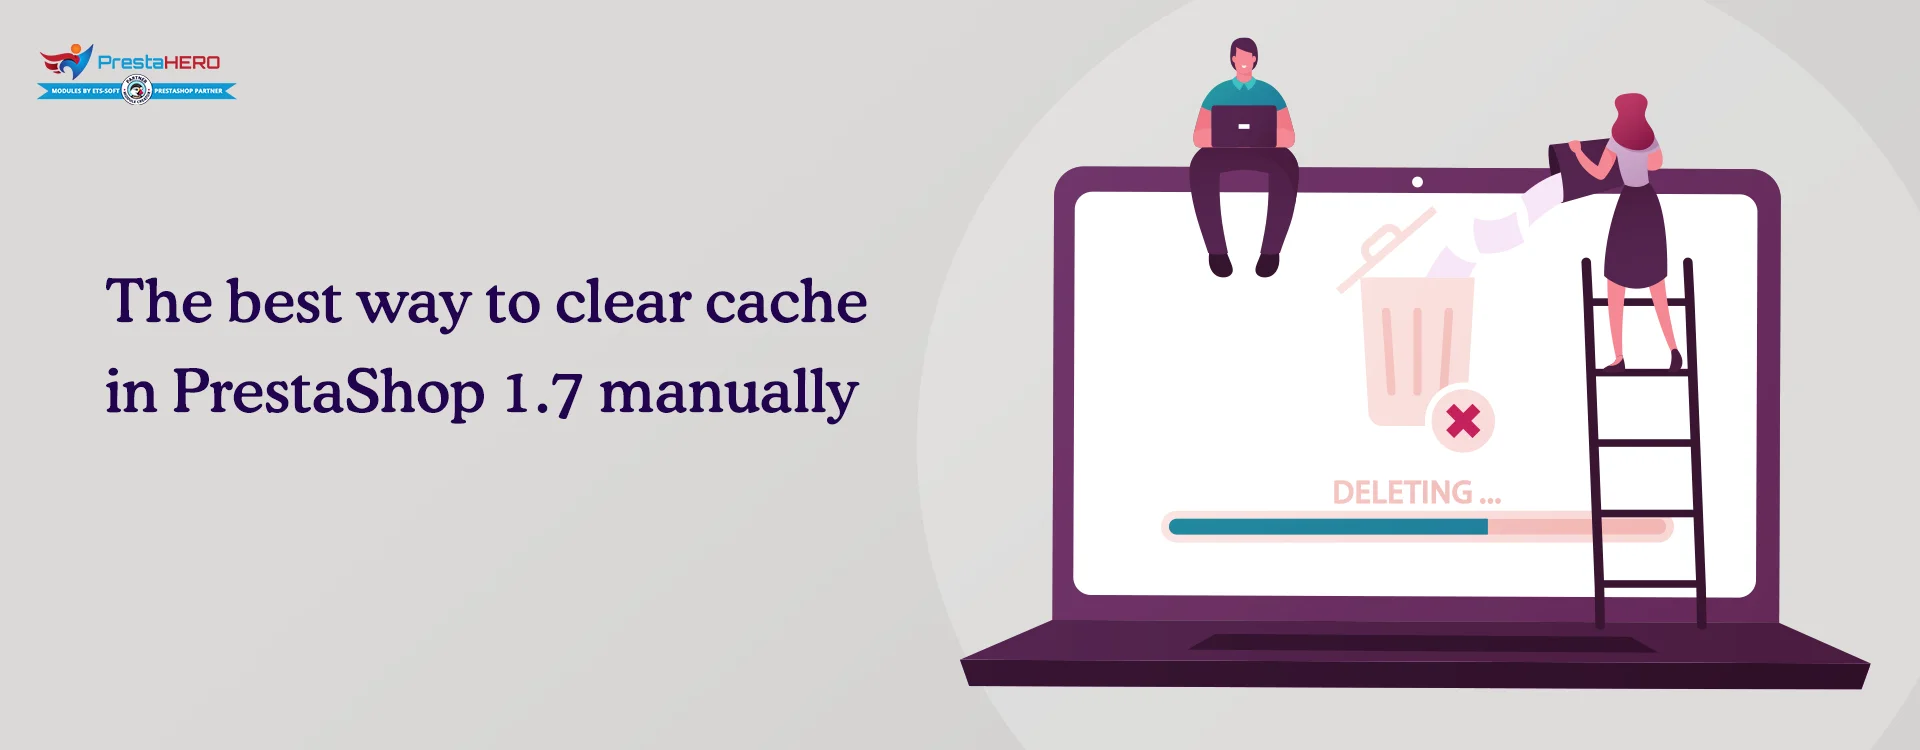 The best way to clear cache in PrestaShop 1.7 manually